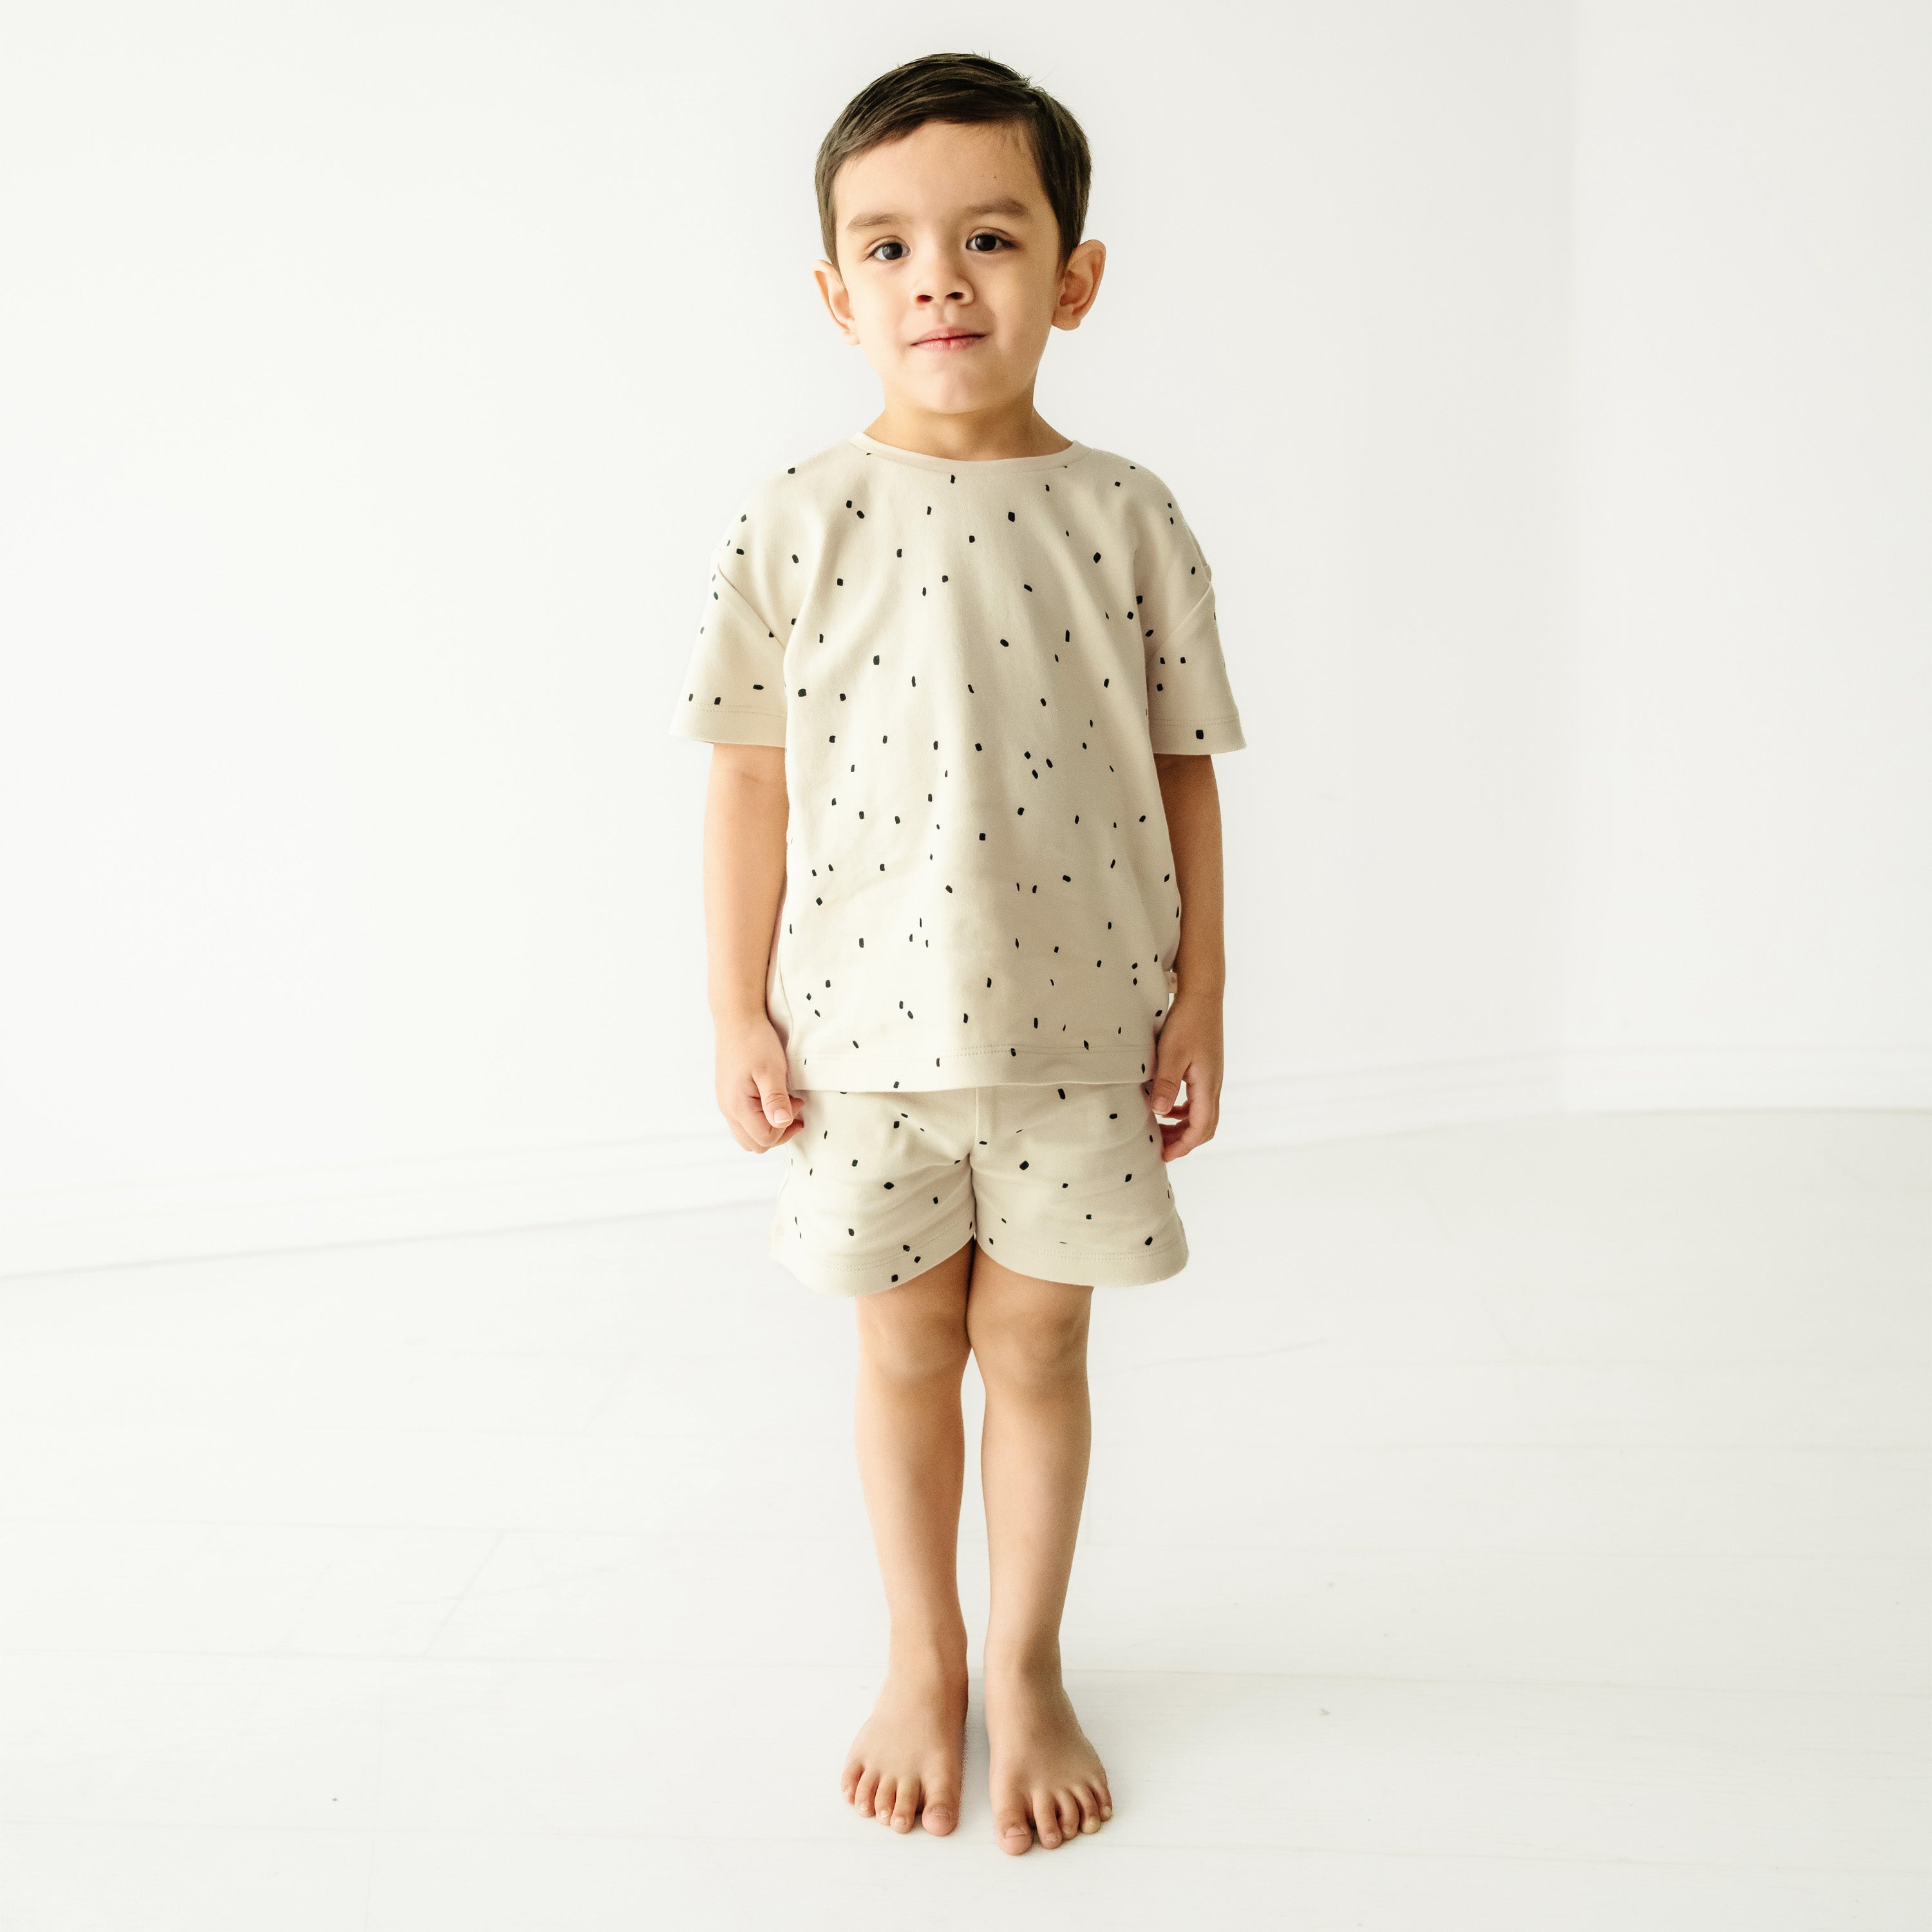 Organic Tee And Shorts Set - Pixie Dots